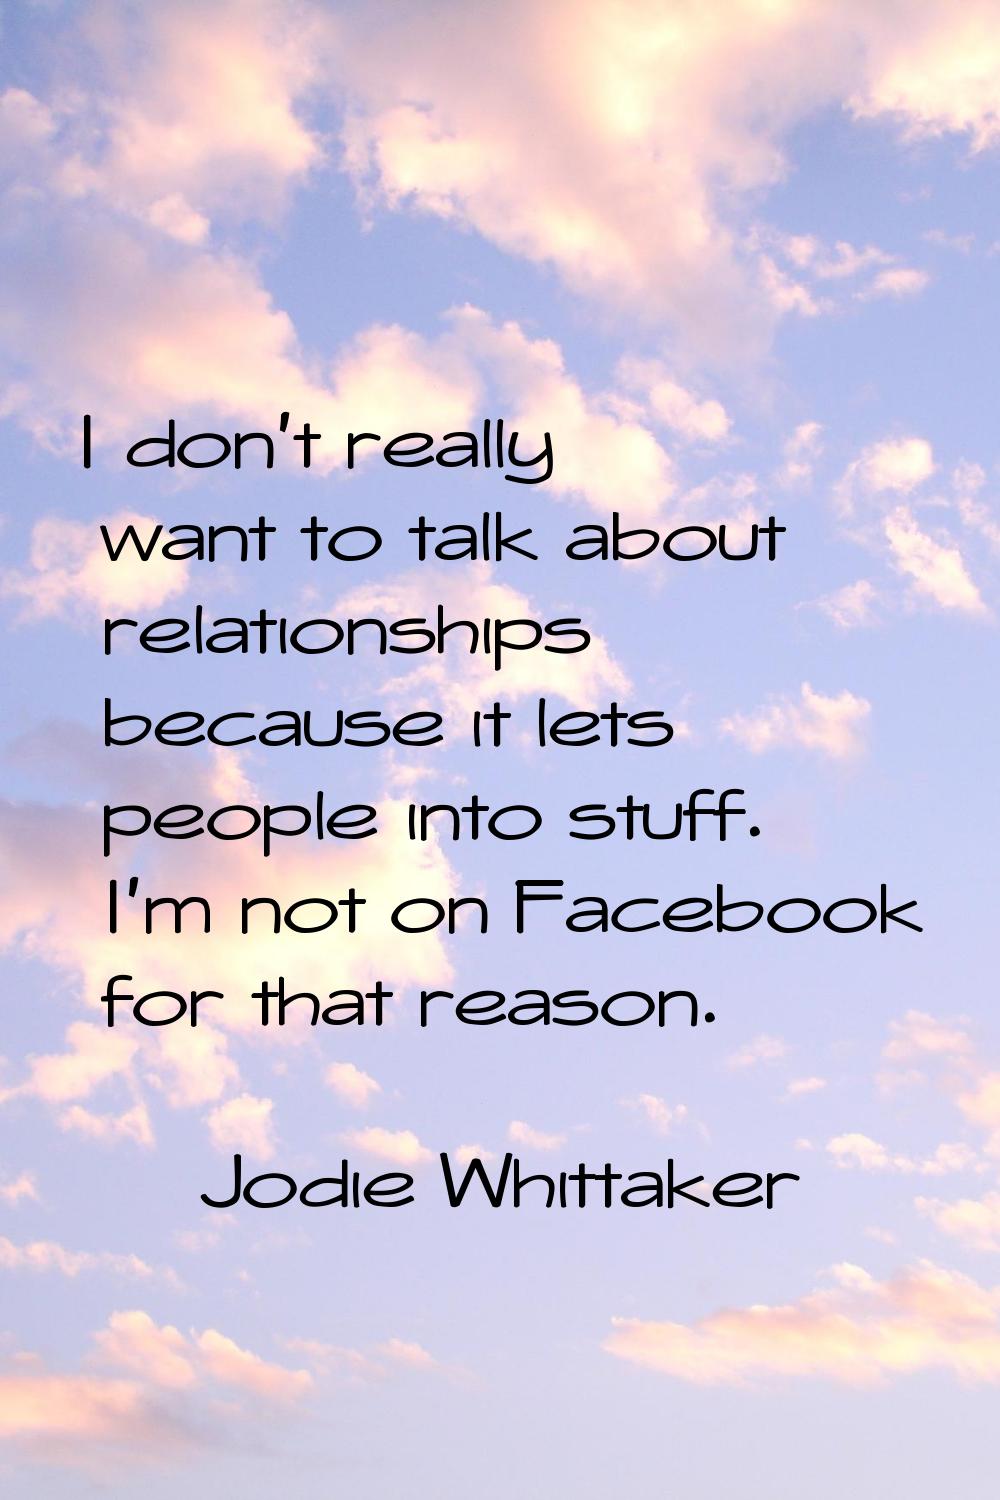 I don't really want to talk about relationships because it lets people into stuff. I'm not on Faceb